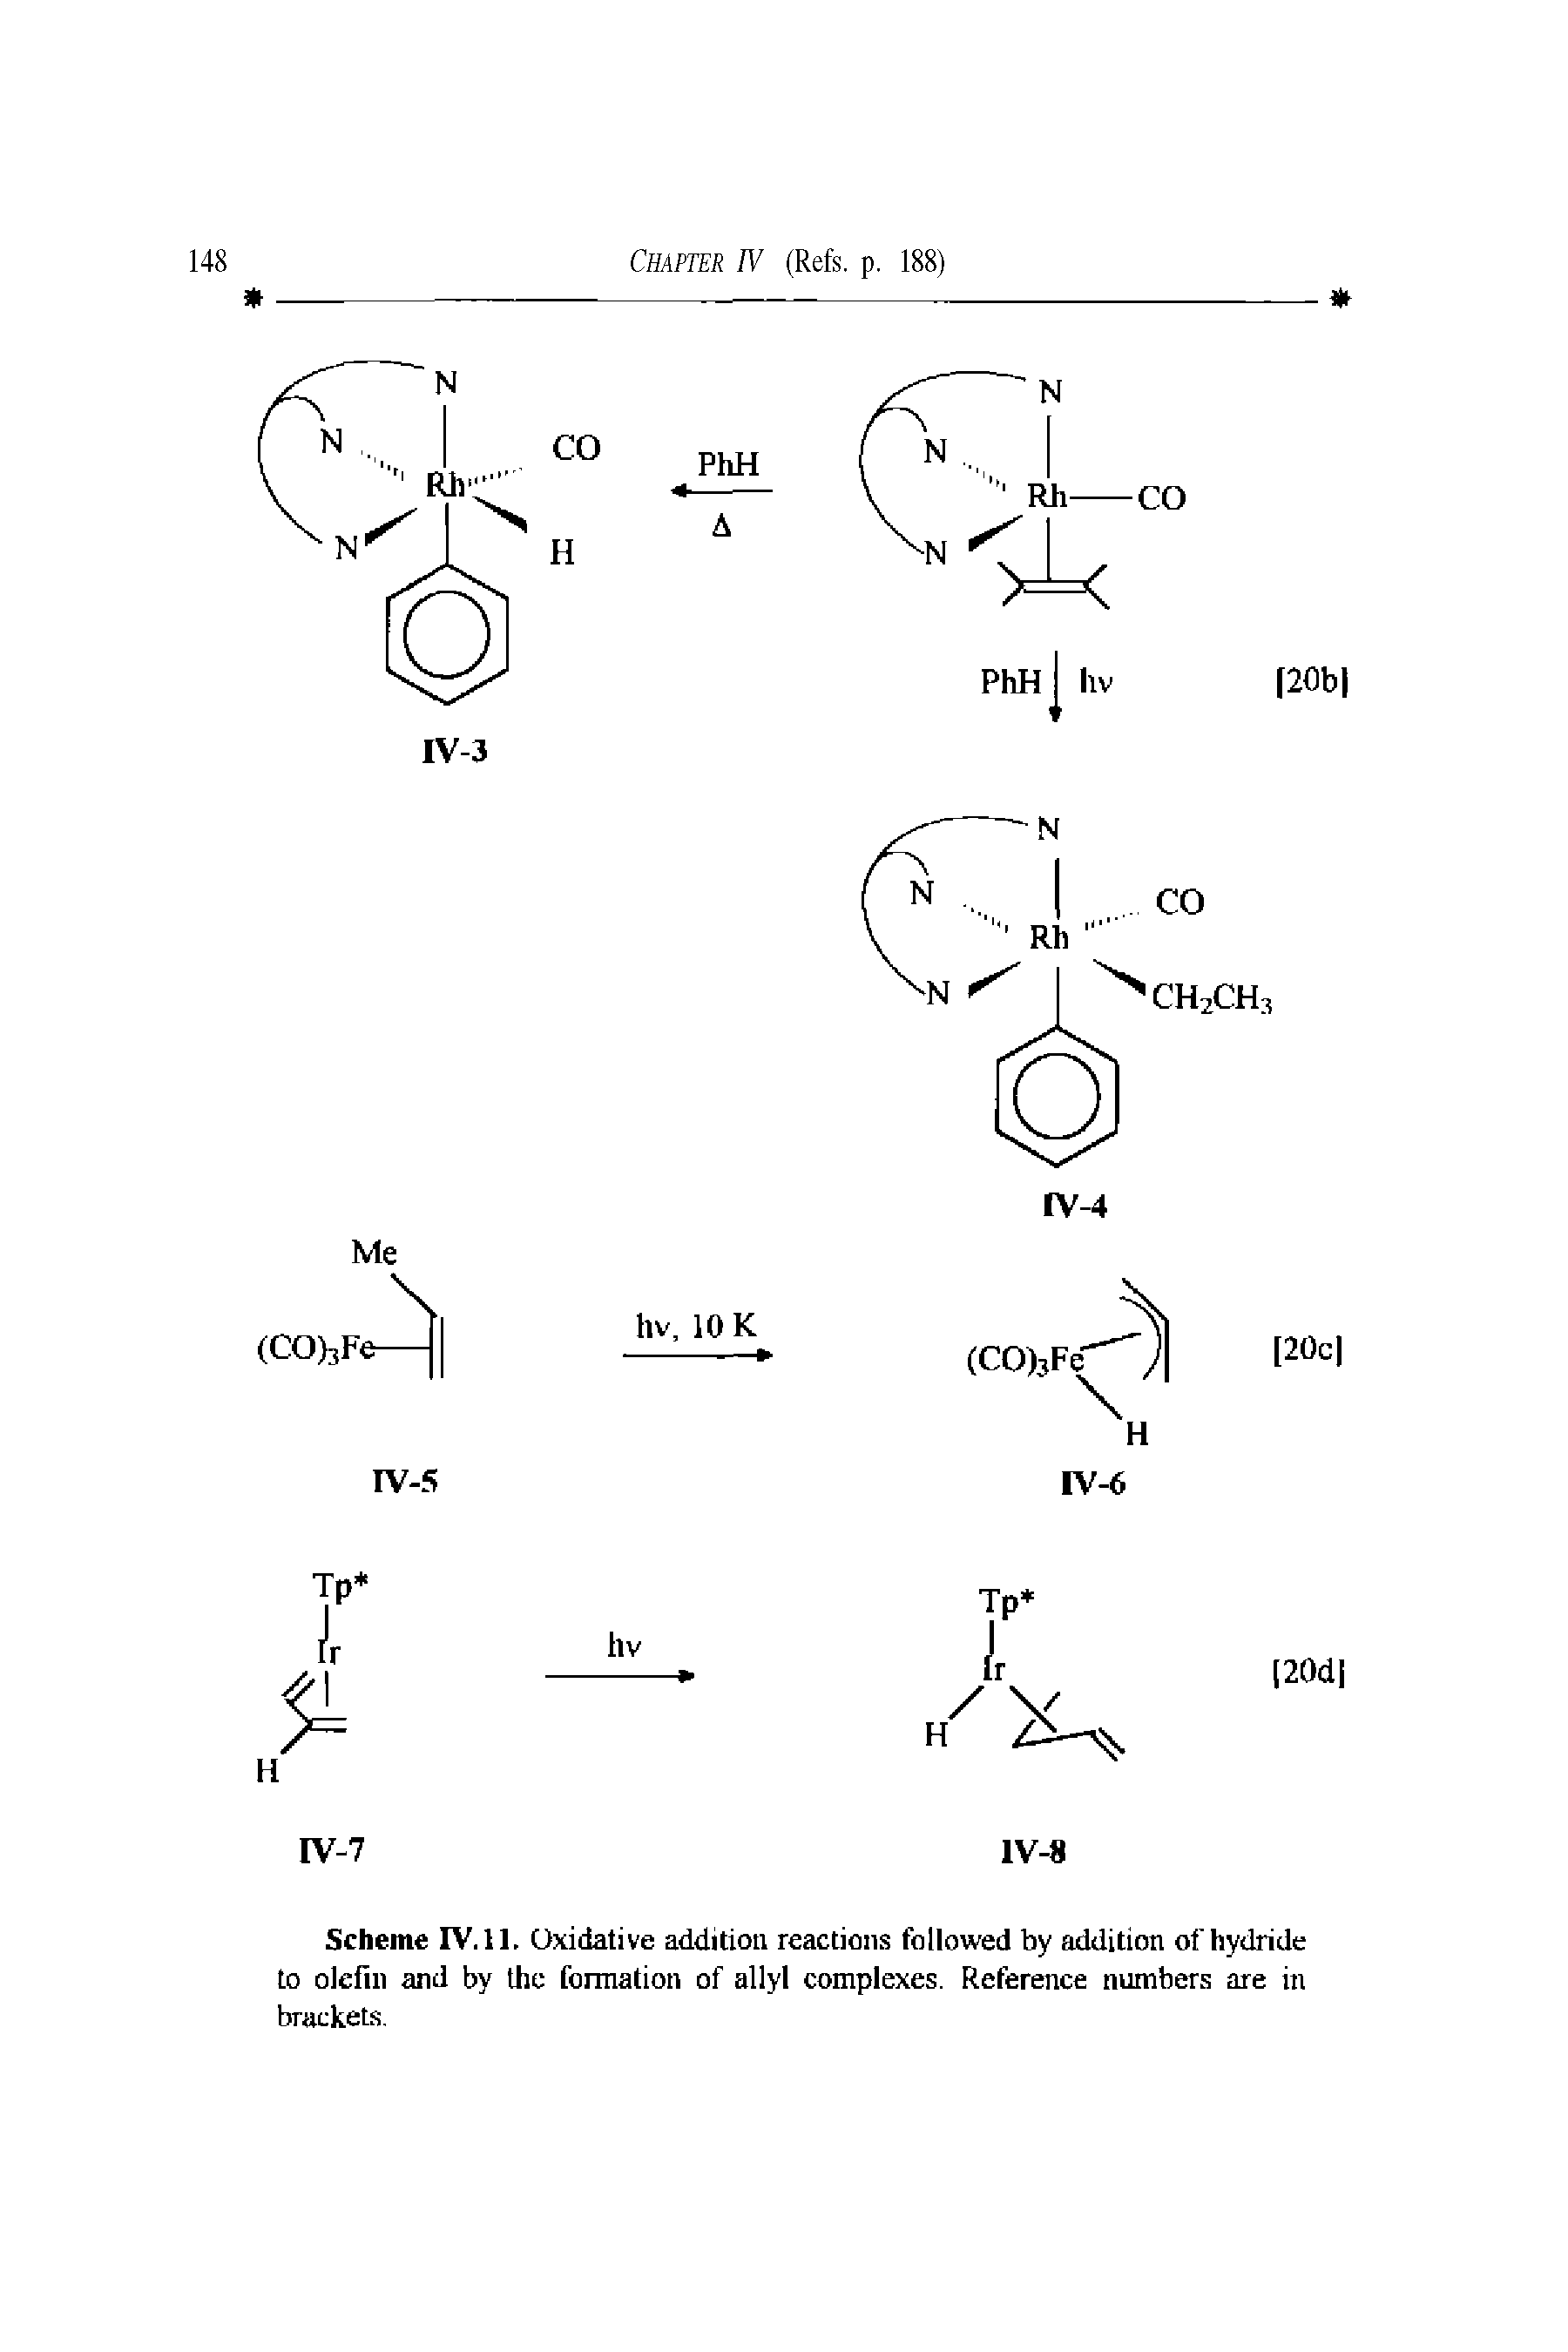 Scheme IV. 11. Oxidative addition reactions followed by addition of hydride to olefin and by the formation of allyl complexes. Reference numbers are in brackets.